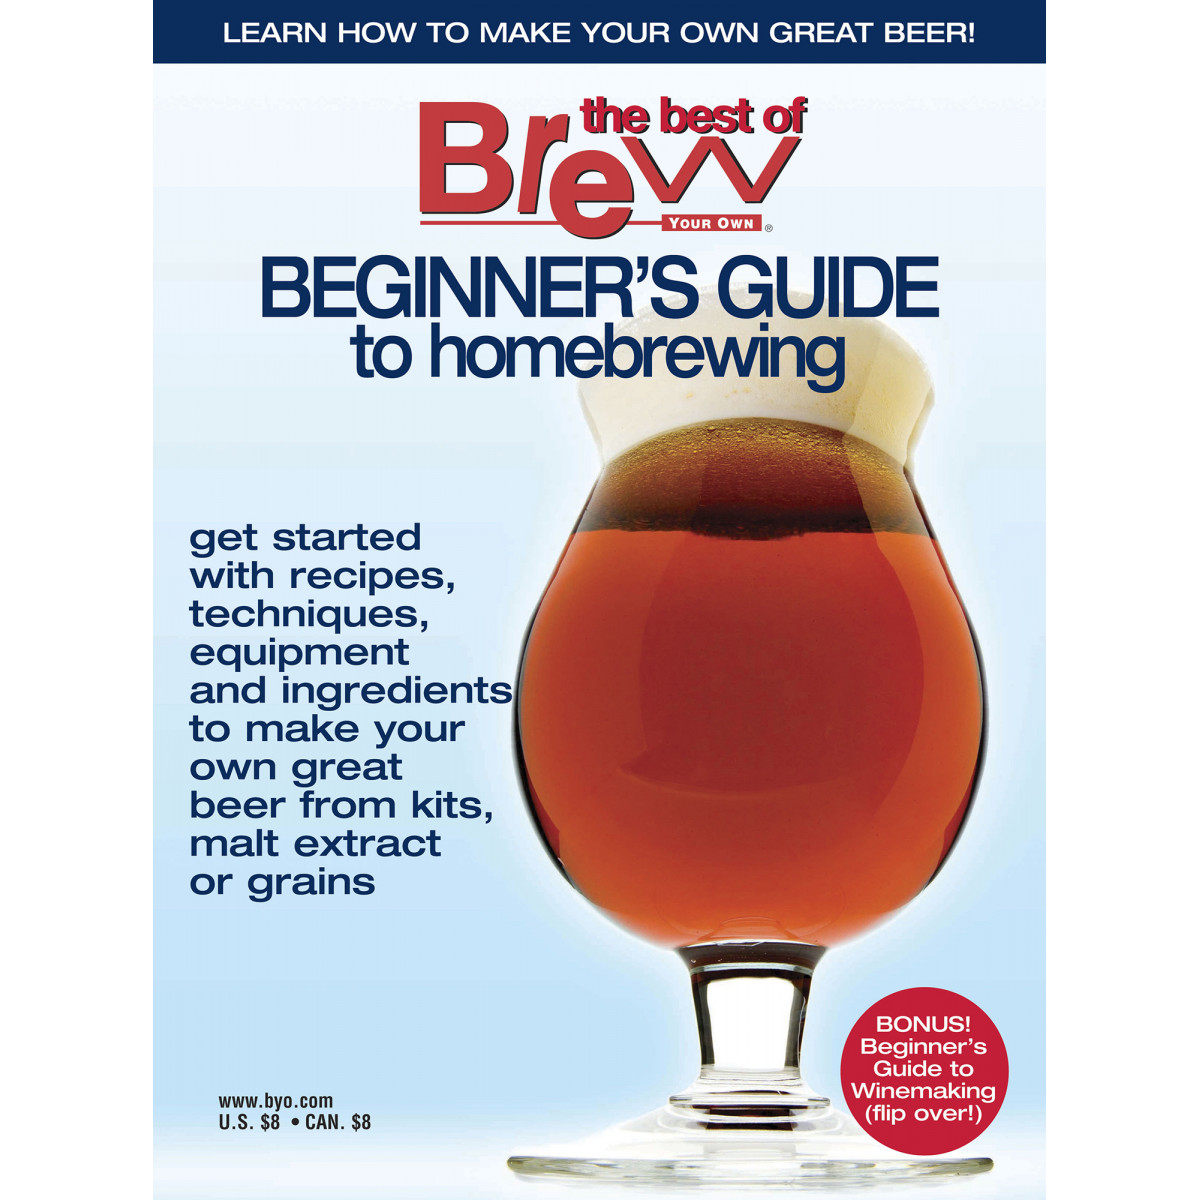 Beginner's guide to homebrewing